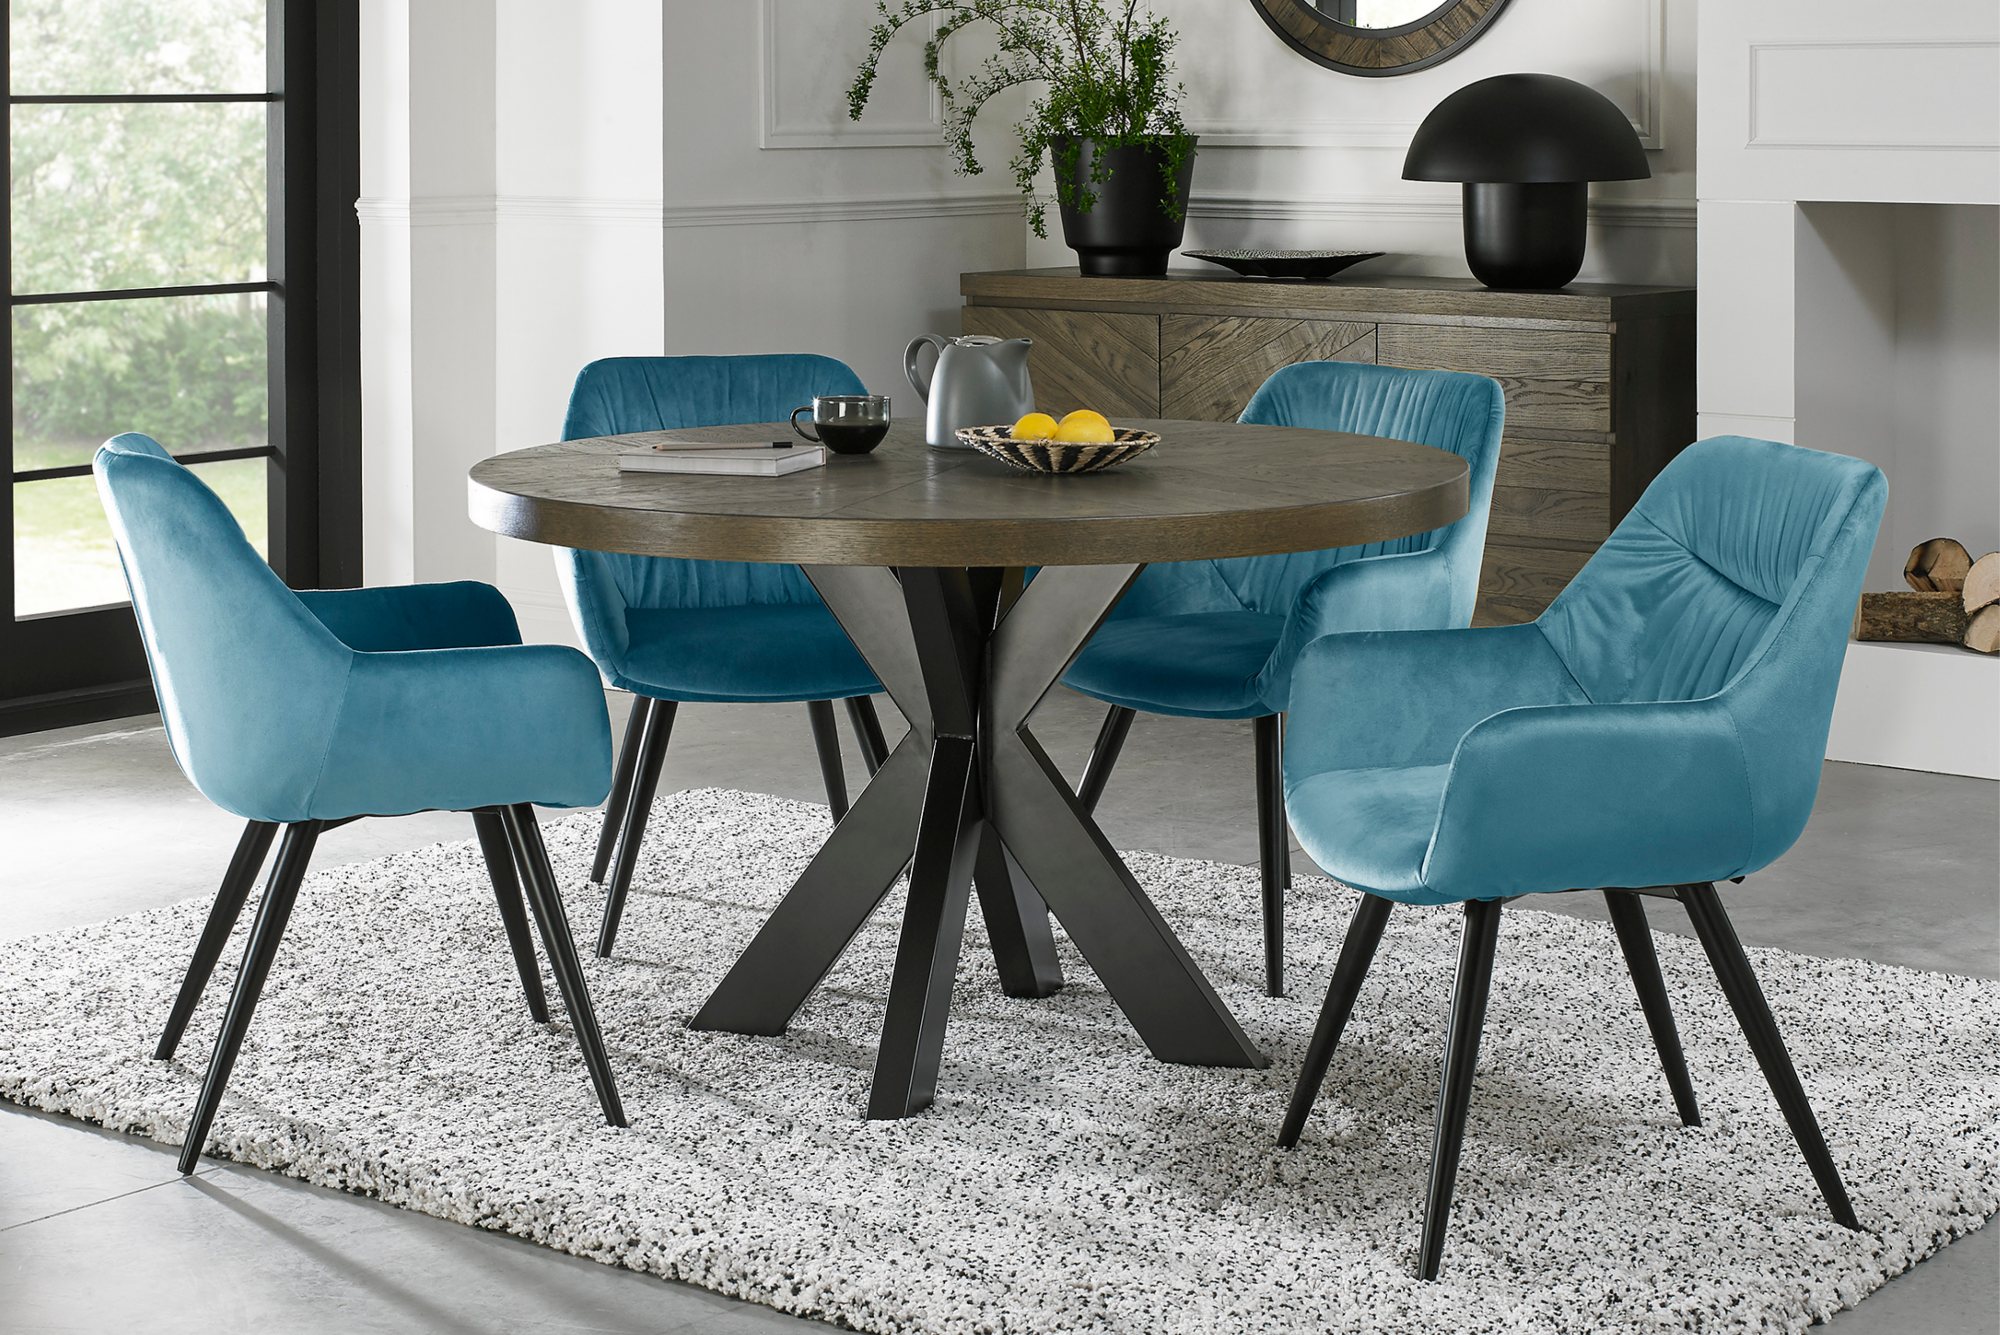 Home Origins Bosco fumed oak 4 seater dining table with 4 Dali chairs- petrol blue velvet fabric